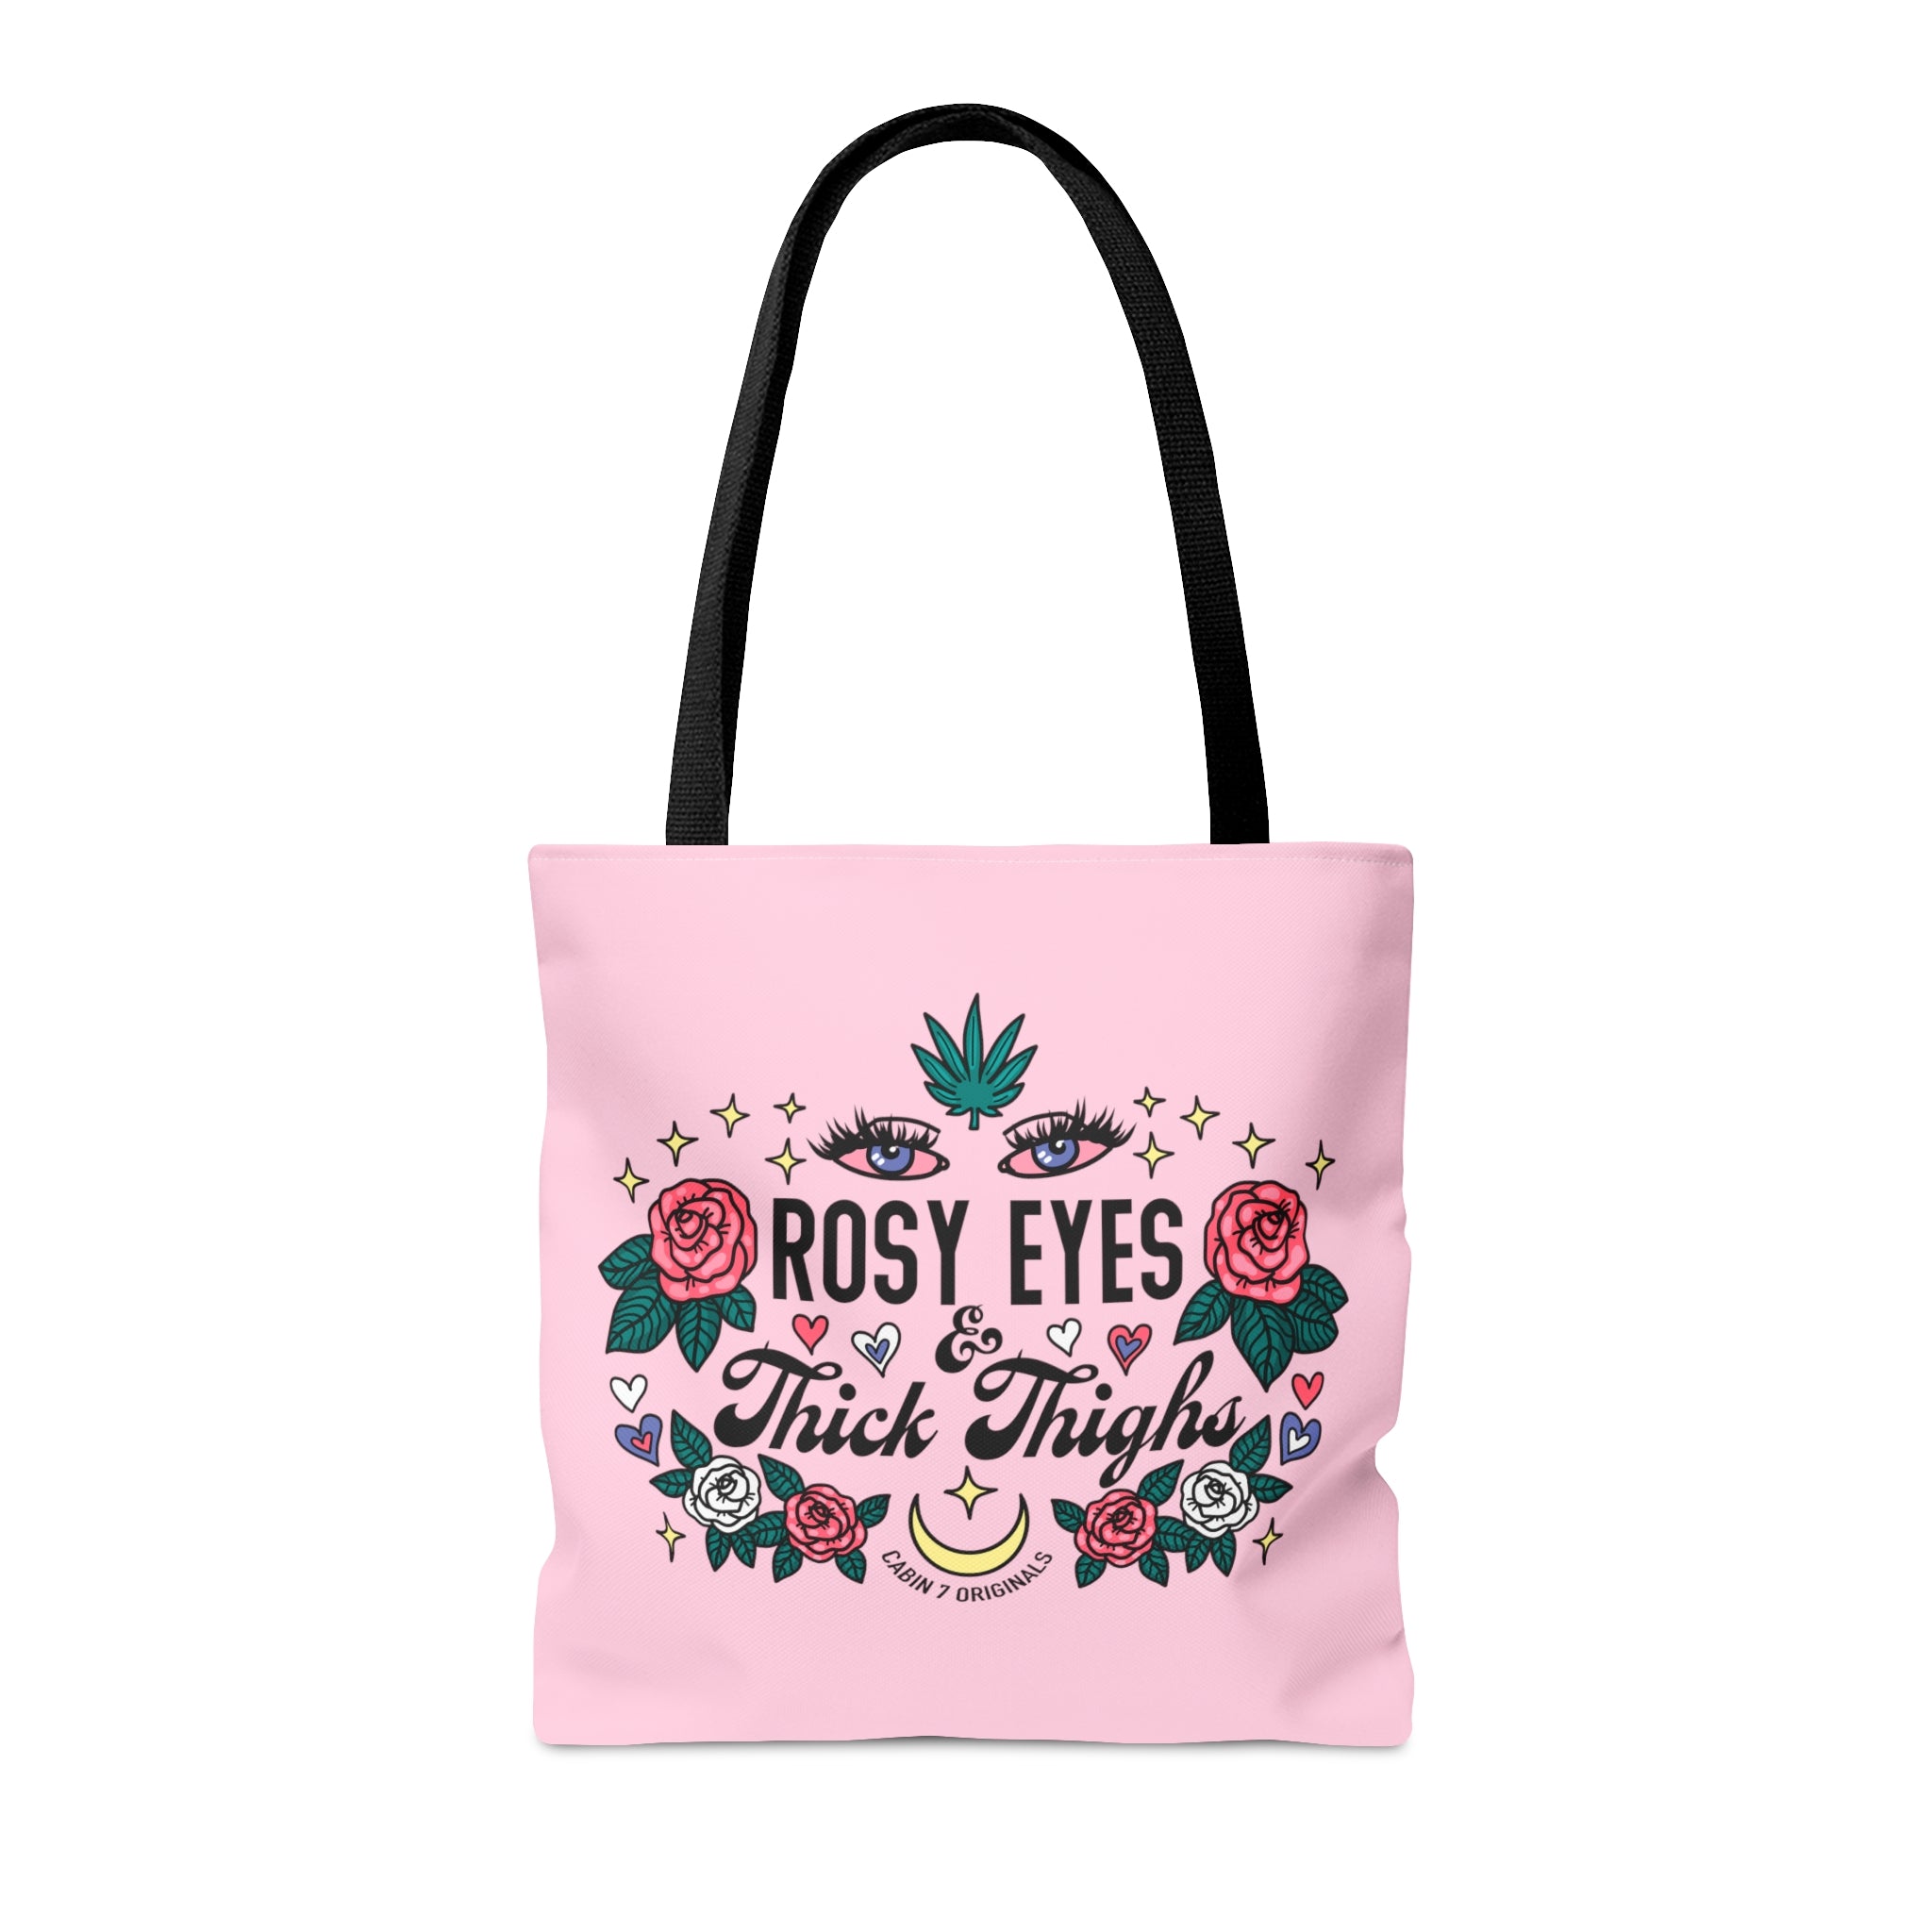 Rosy Eyes & Thick Thighs Tote Bag